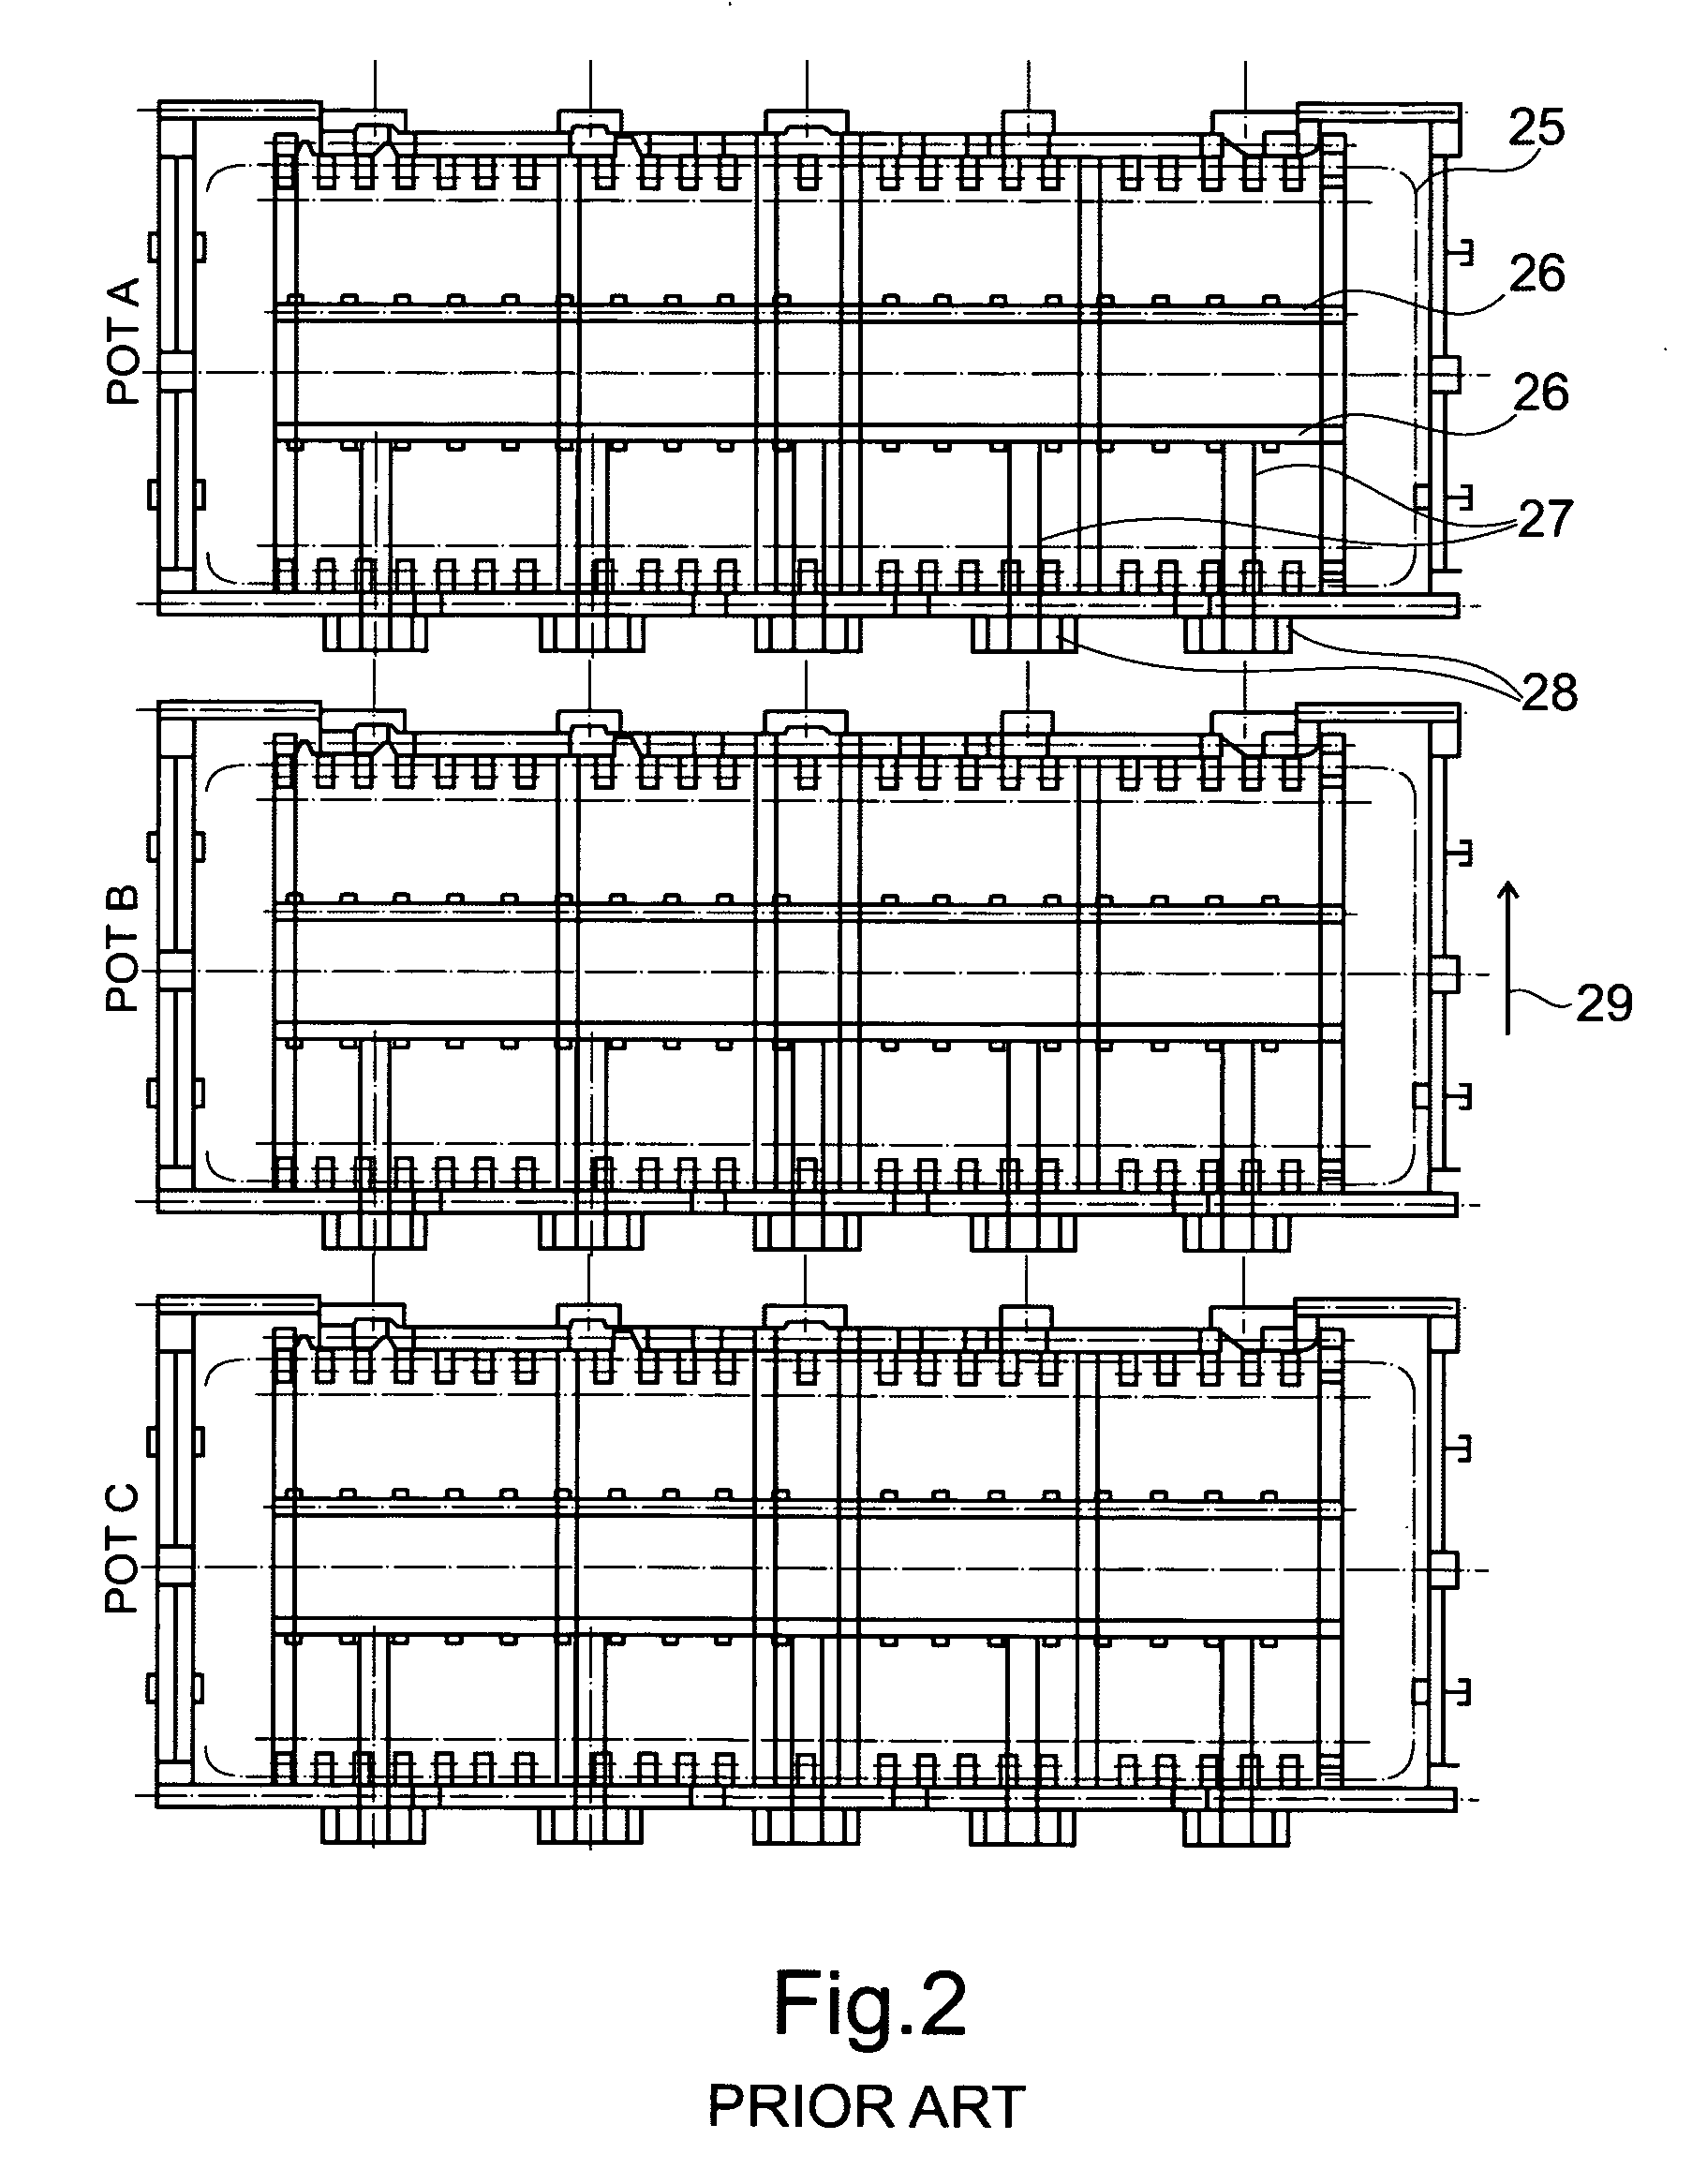 Process for online power cut out of an aluminum reduction cell